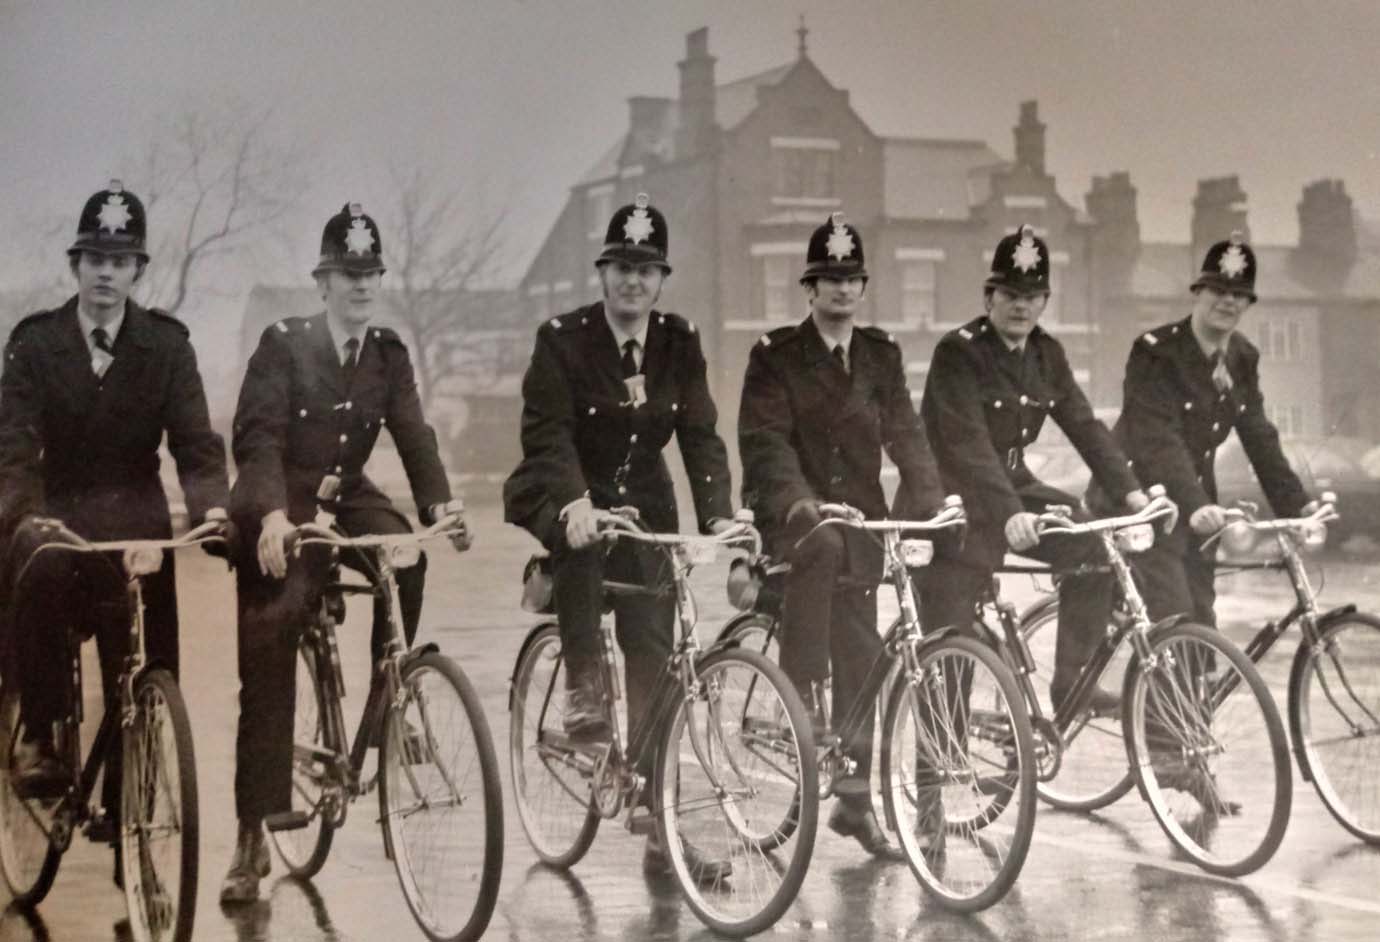 Fred, centre left, back in the day, ready for his cycle beat.